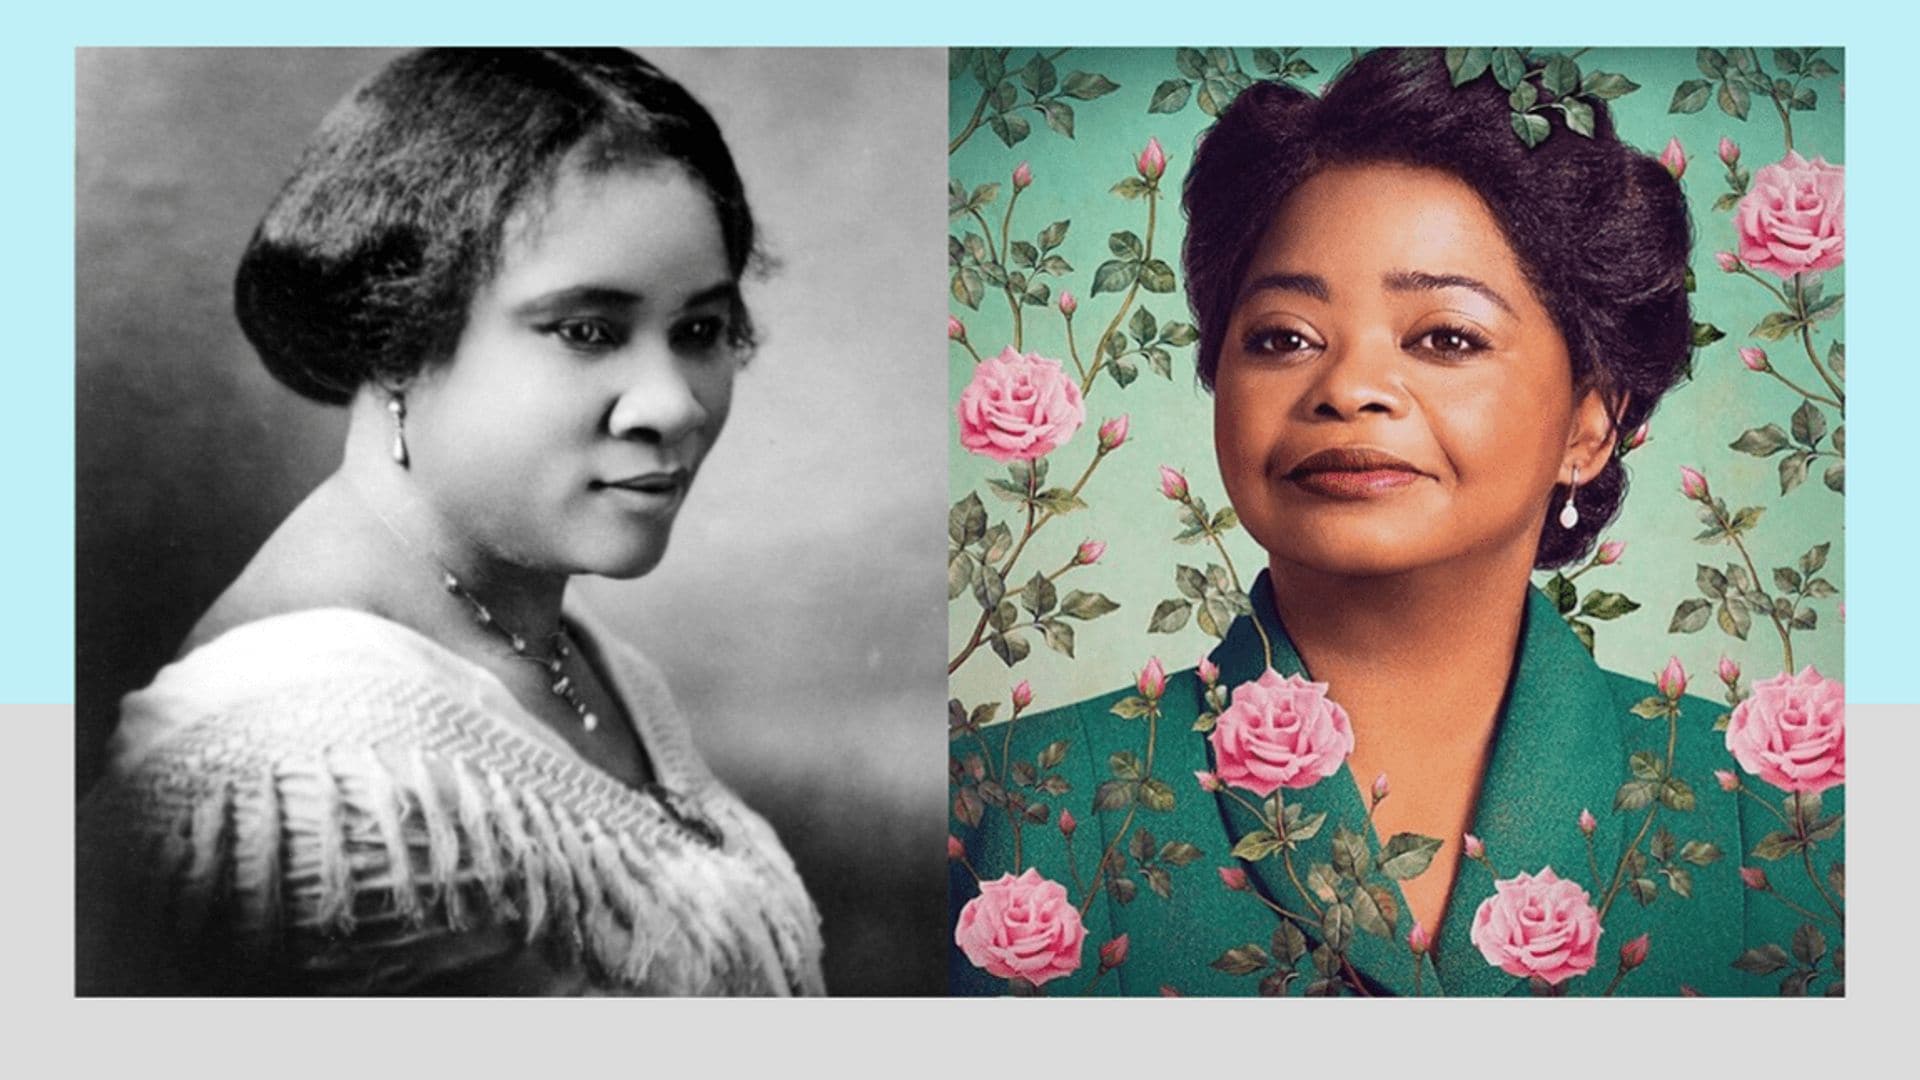 Lessons every beauty entrepreneur can learn from Madam C.J. Walker's life